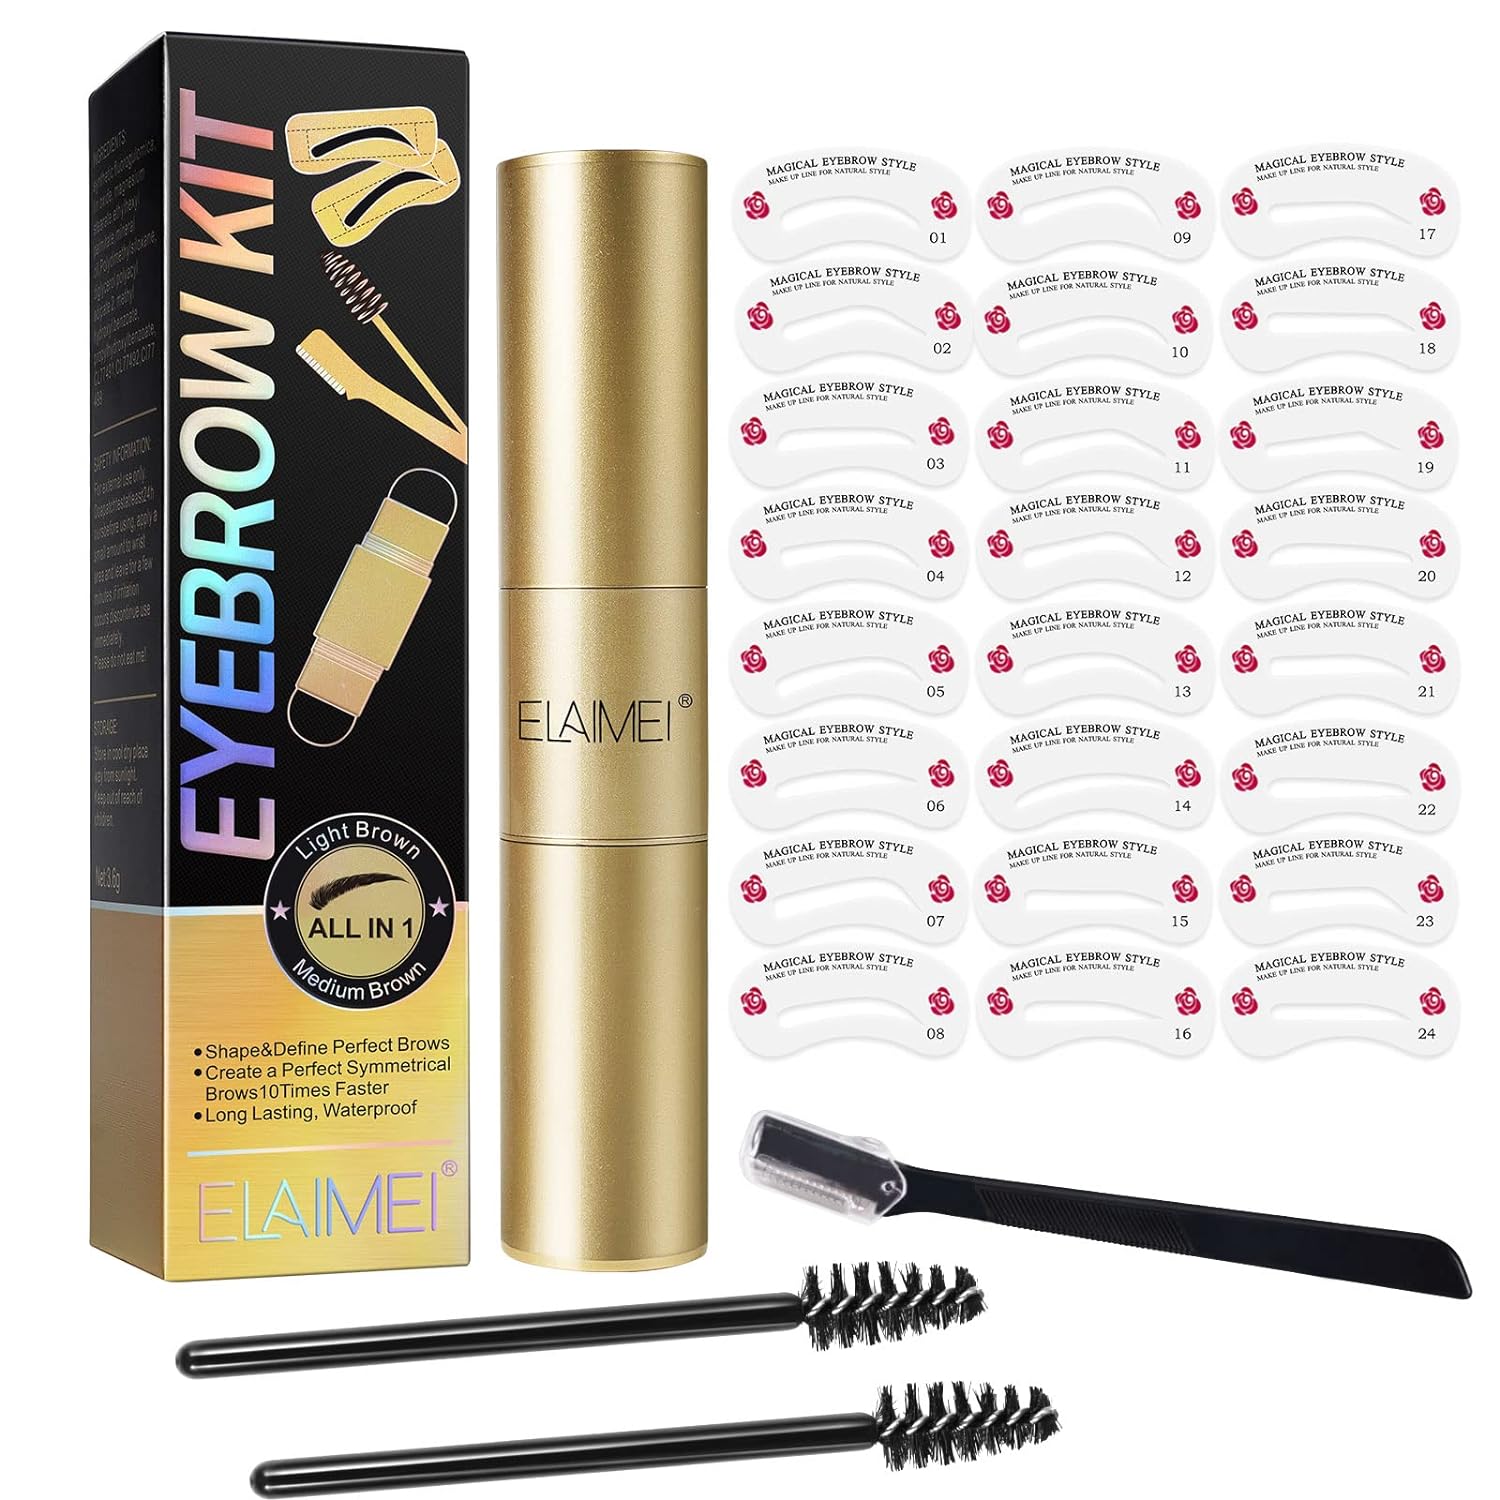 Eyebrow Stamp Stencil Kit - Upgrade Dual-tone Brow Stamp, Long Lasting Waterproof Perfect Eyebrow Kit, With 24 Reusable Stencils and 2 Small Brow Brushes & 1 Brow Knife (light brown+medium brown)